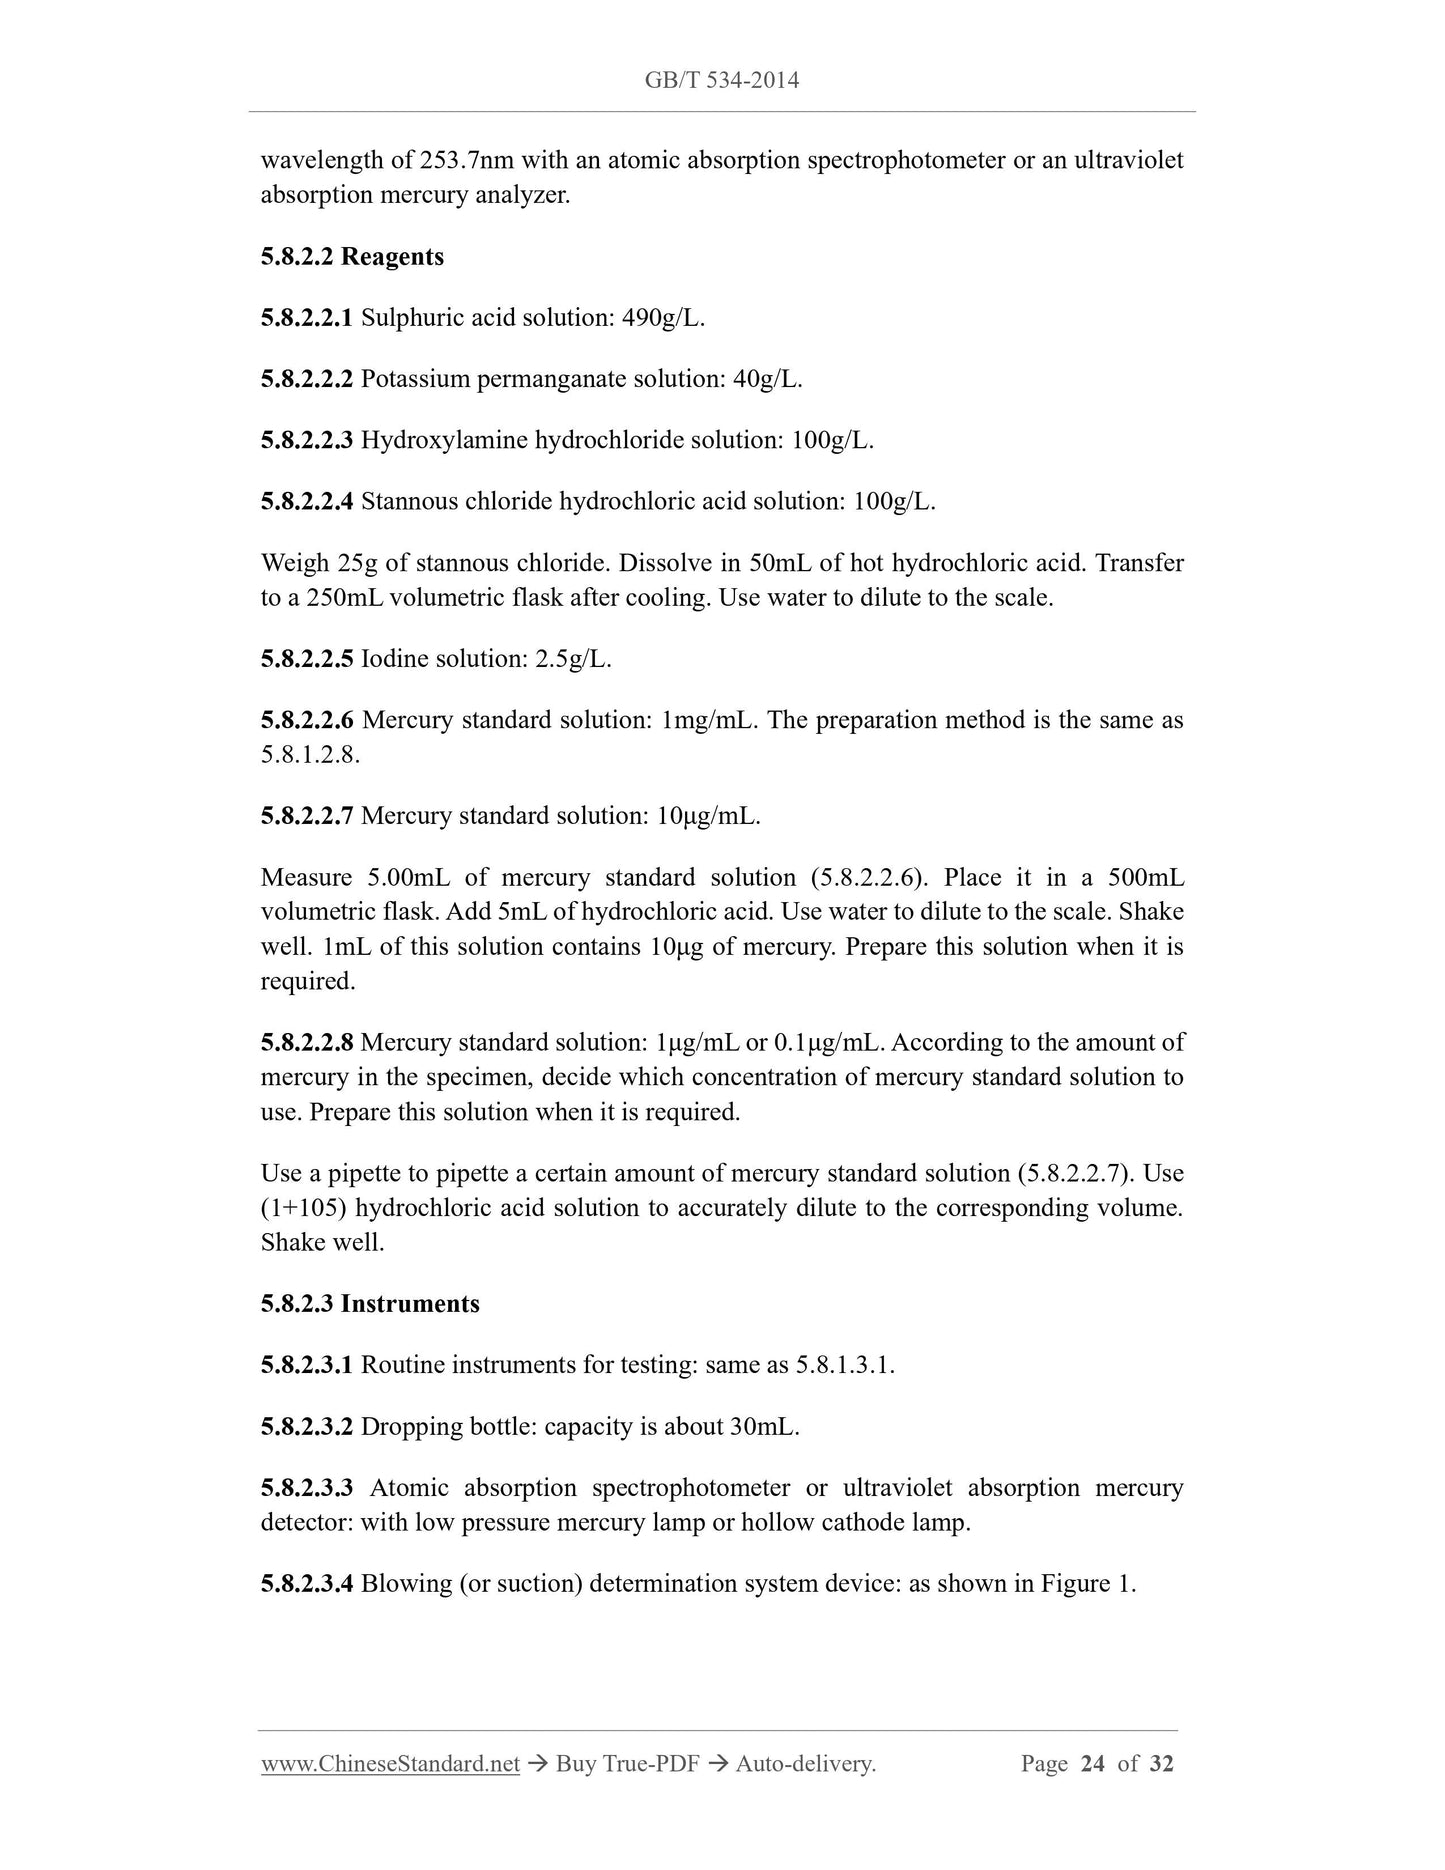 GB/T 534-2014 Page 10